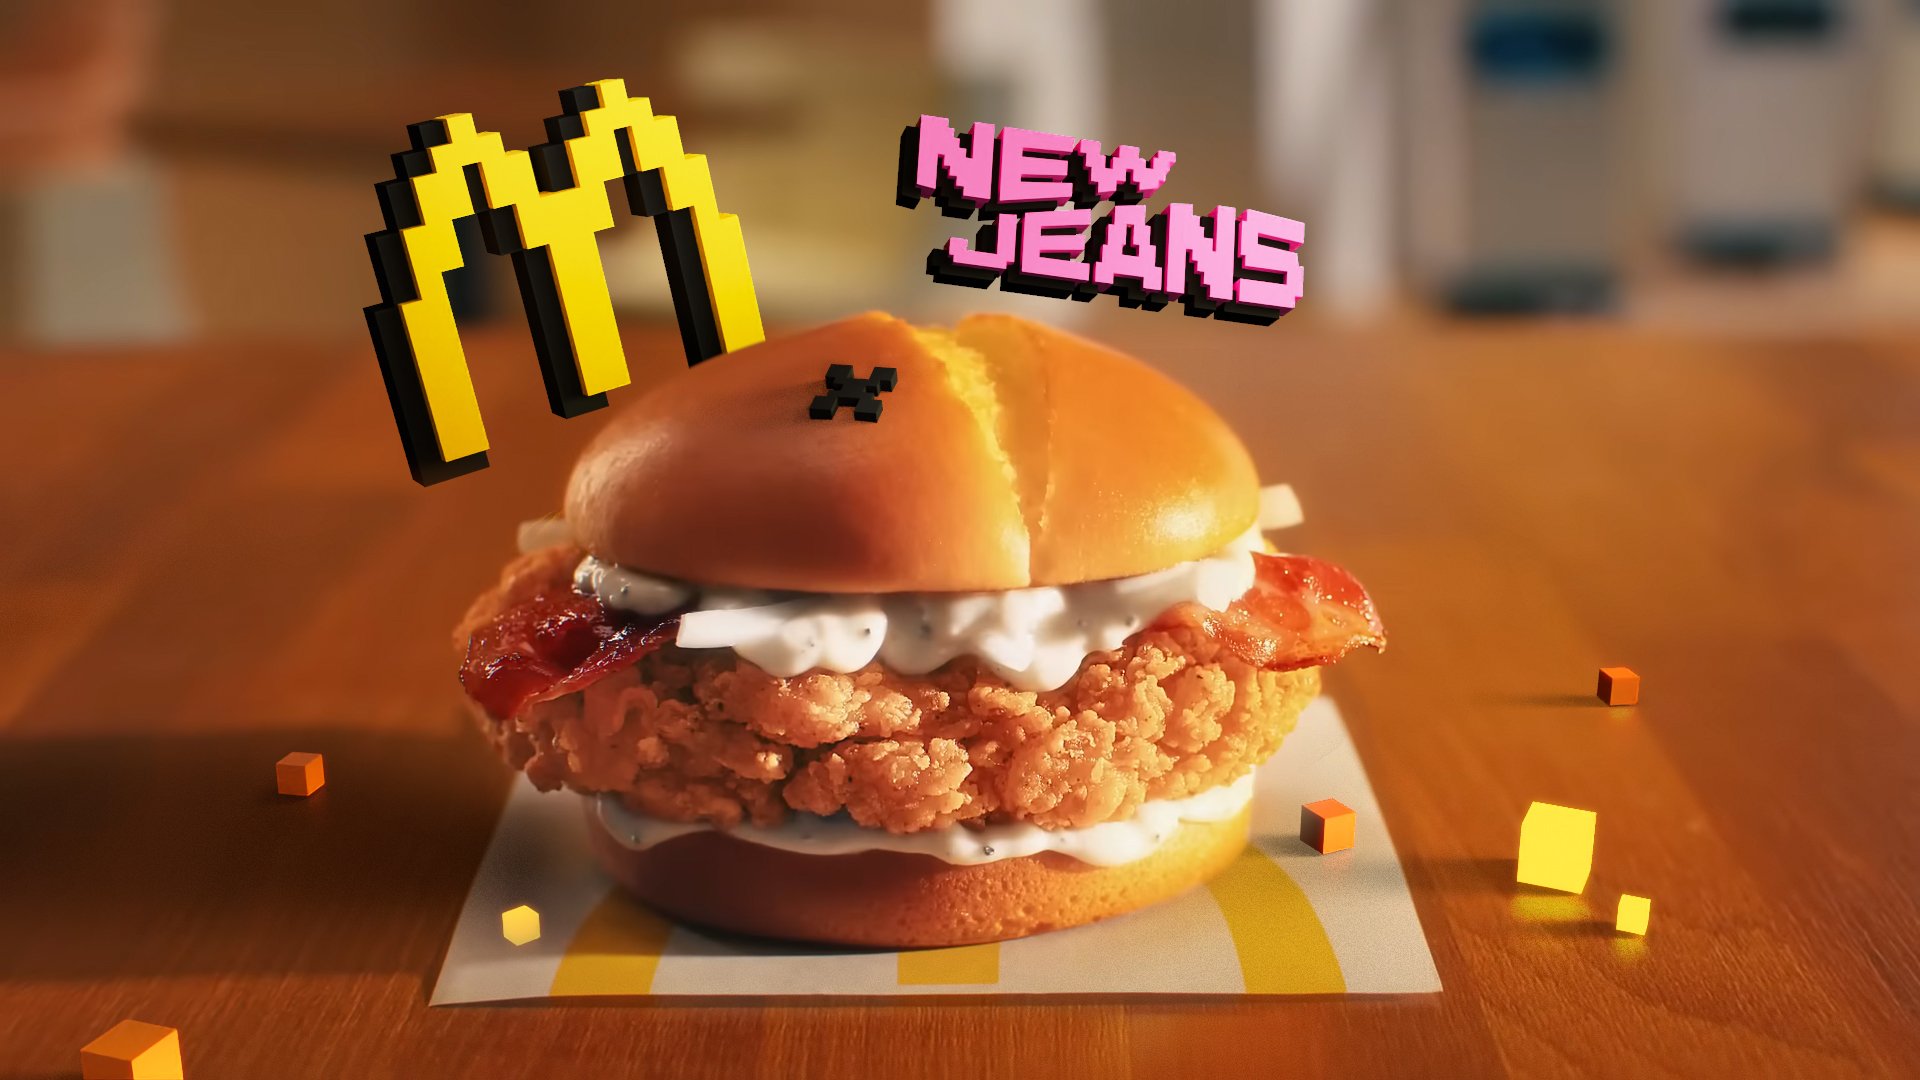 New Jeans Meal poster ad